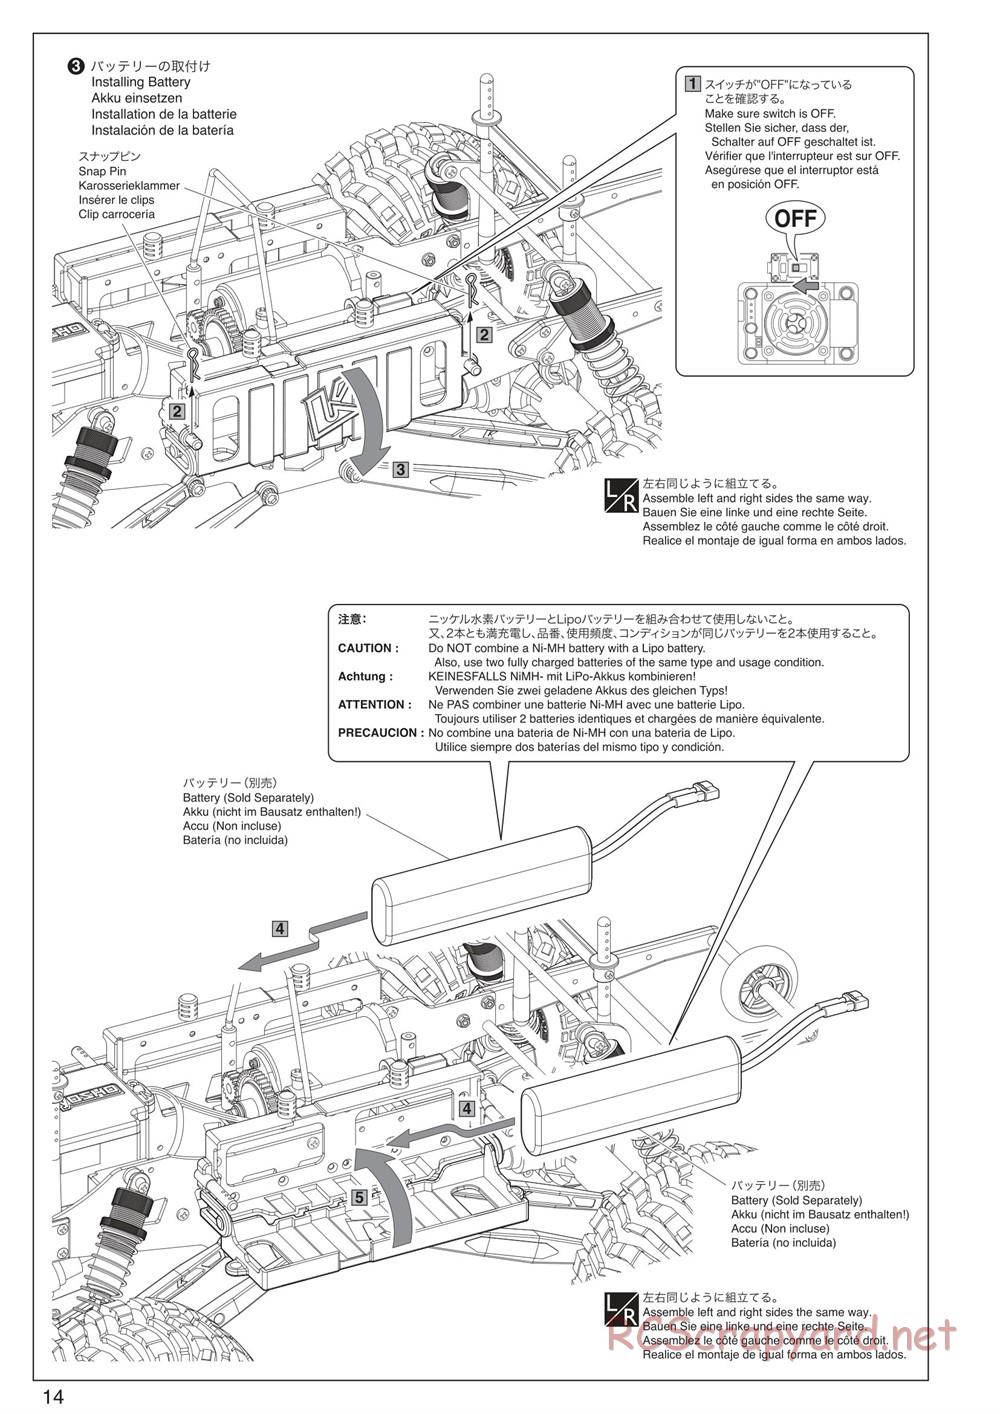 Kyosho - Mad Crusher VE - Manual - Page 14